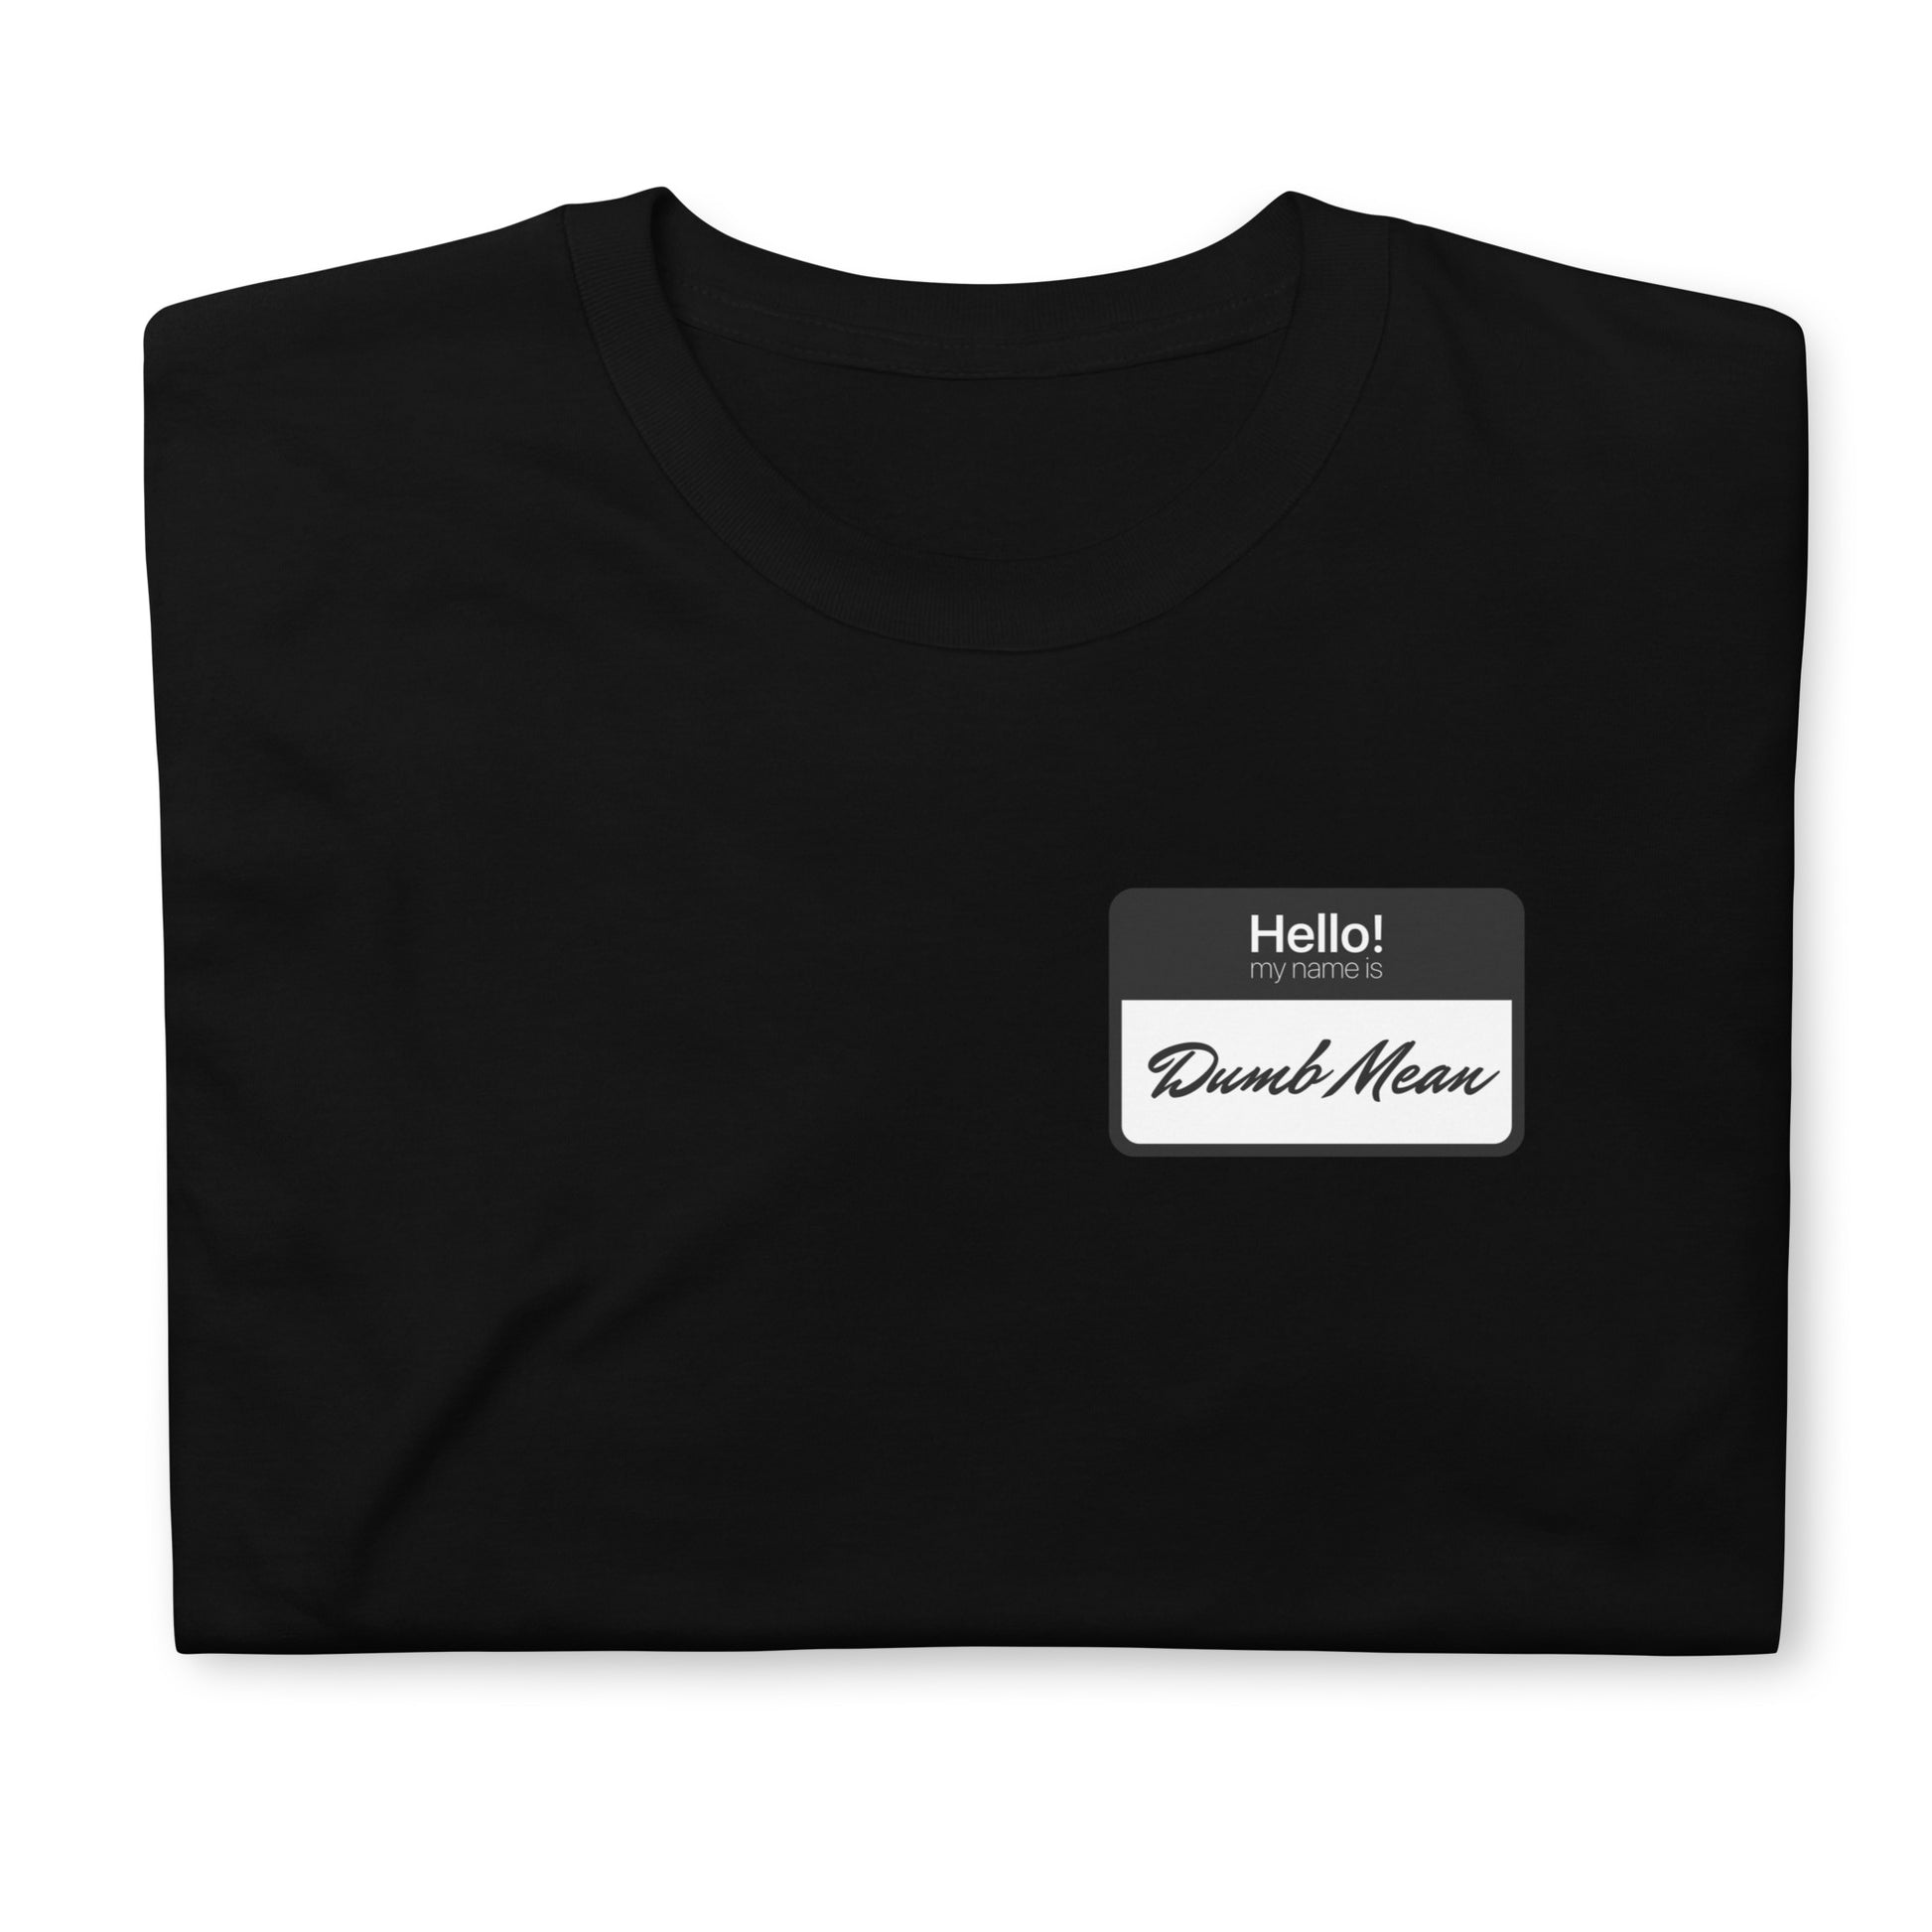 Hello My Name is: Dumb Mean Short-Sleeve Unisex T-Shirt.